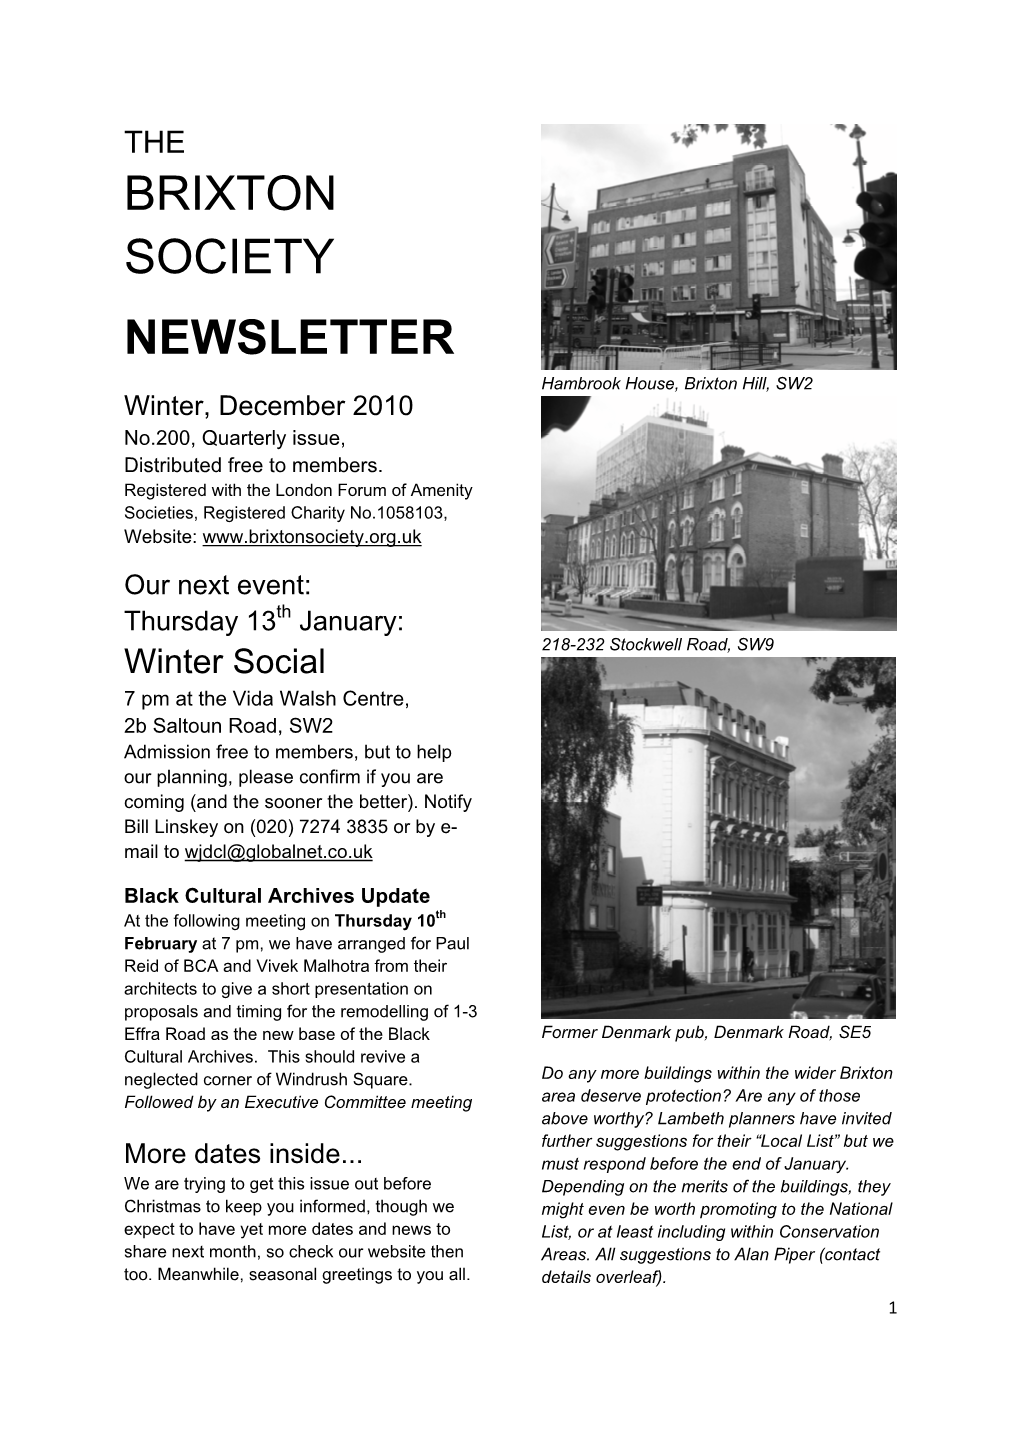 December 2010 No.200, Quarterly Issue, Distributed Free to Members